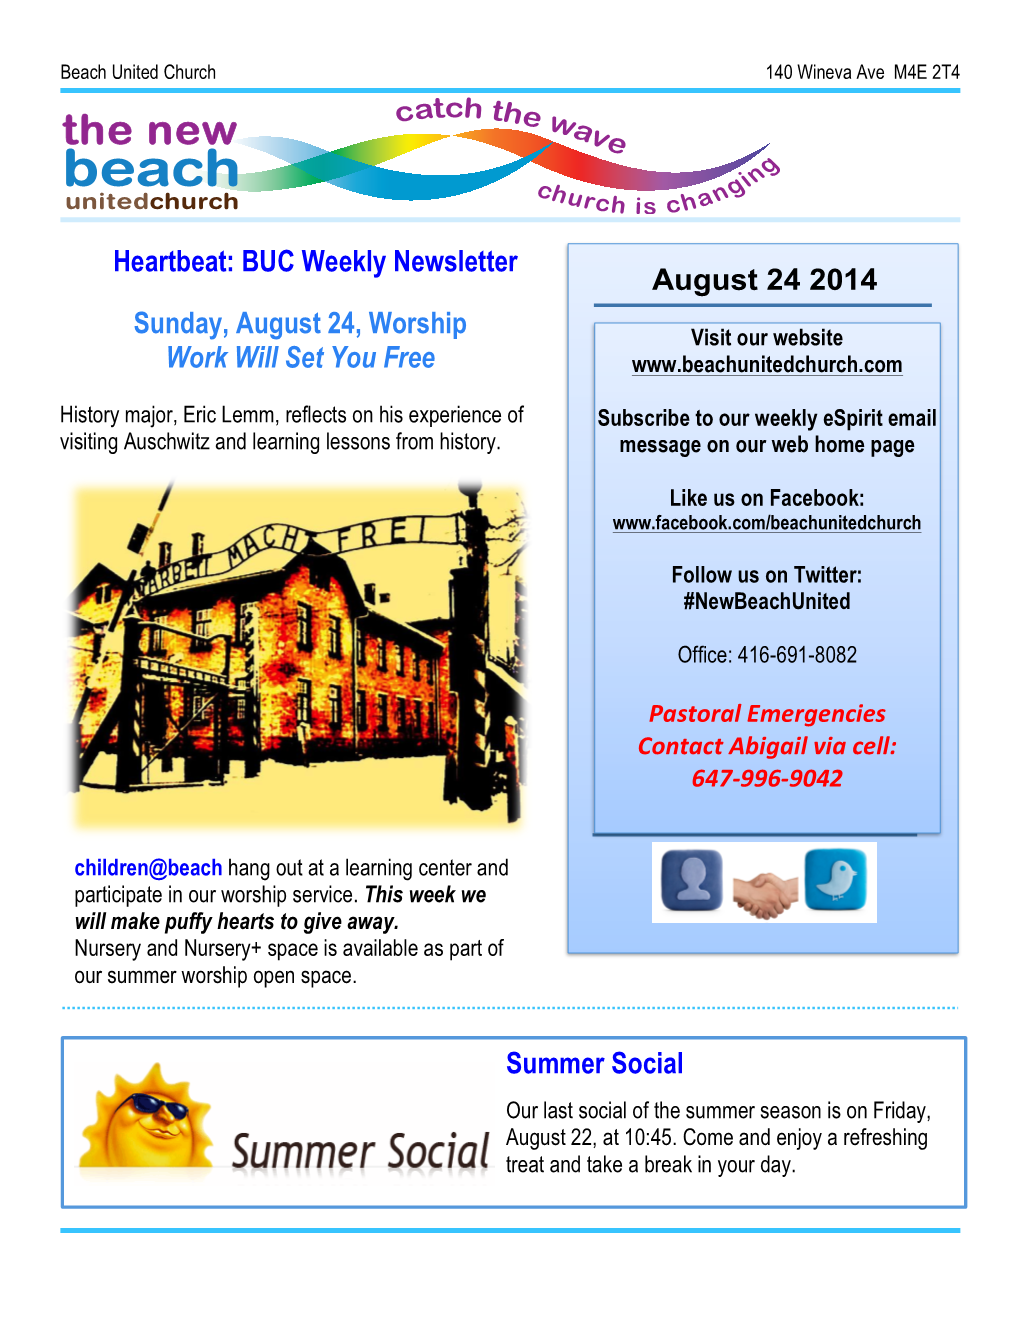 Heartbeat: BUC Weekly Newsletter Sunday, August 24, Worship Work Will Set You Free Summer Social